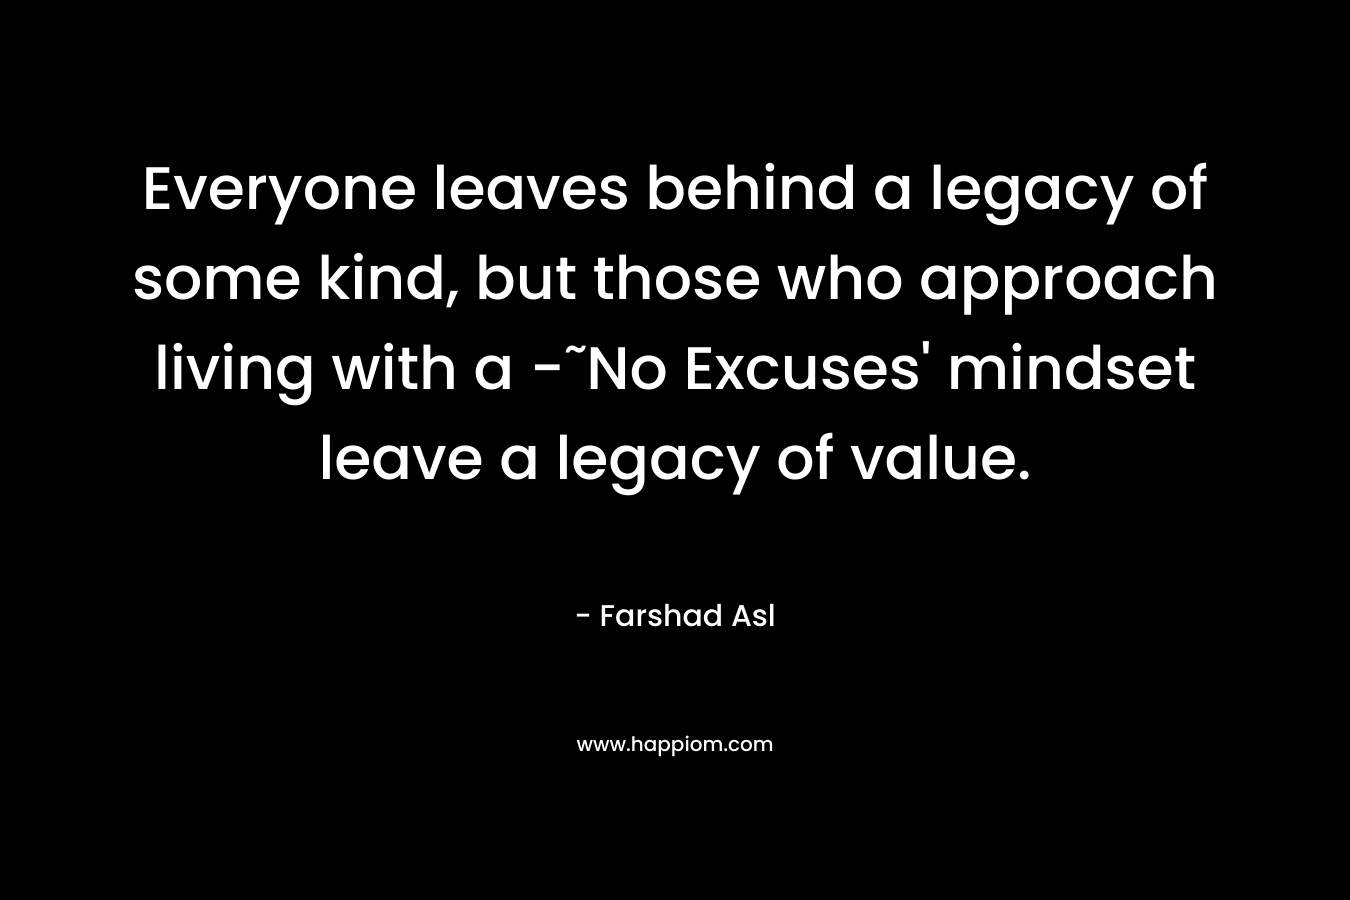 Everyone leaves behind a legacy of some kind, but those who approach living with a -˜No Excuses’ mindset leave a legacy of value. – Farshad Asl